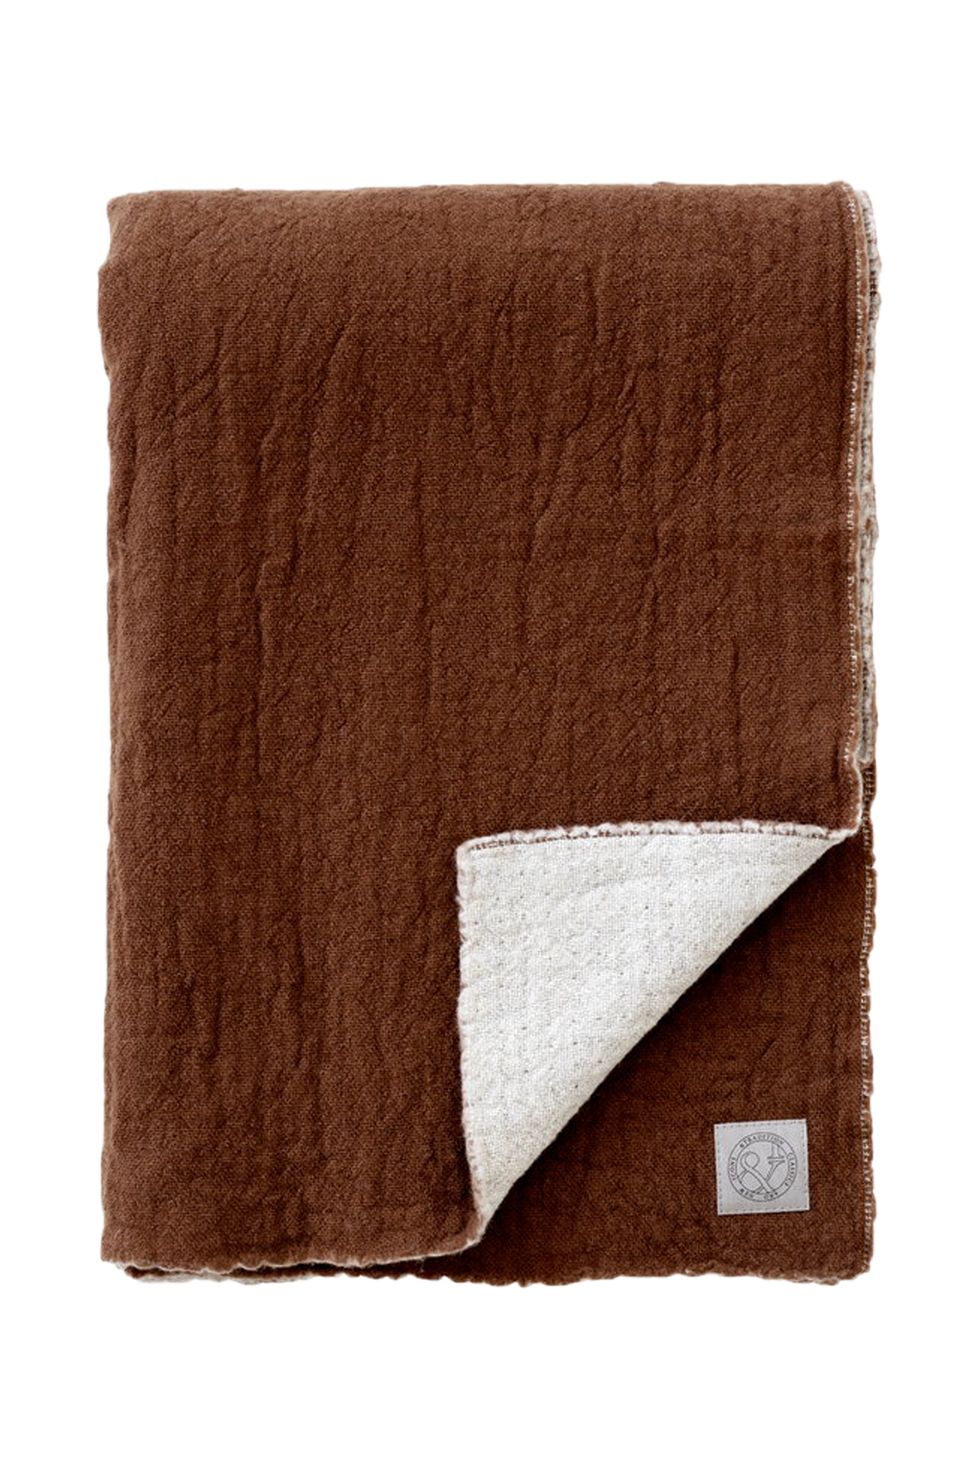 tradition, collect sc34, wool blanket